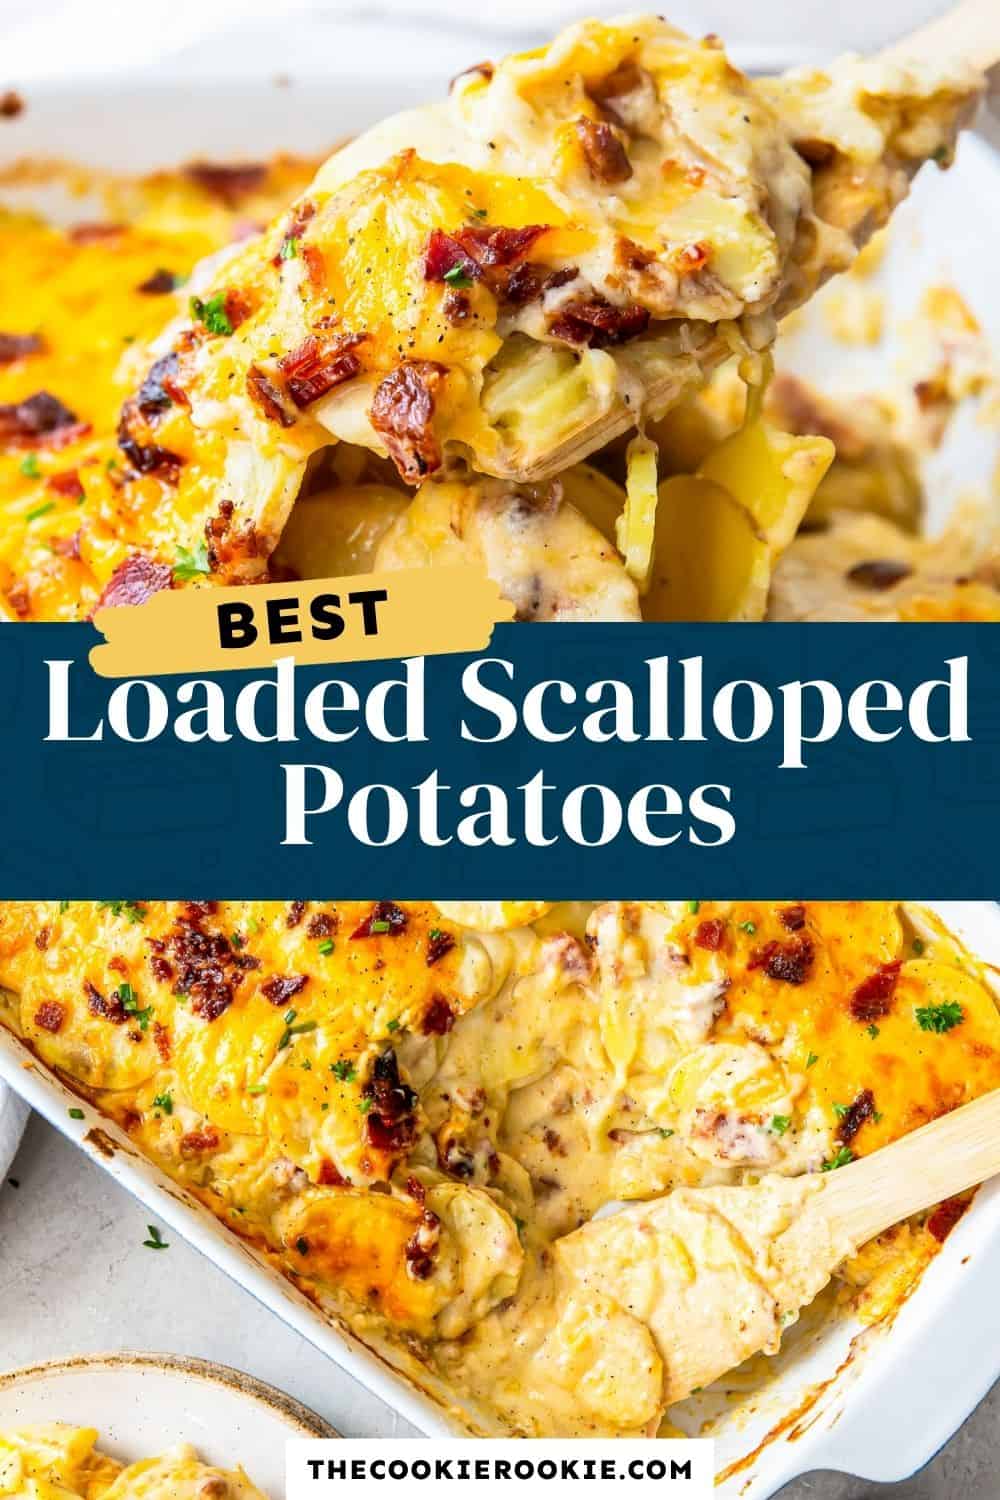 Loaded Scalloped Potatoes Recipe - The Cookie Rookie®